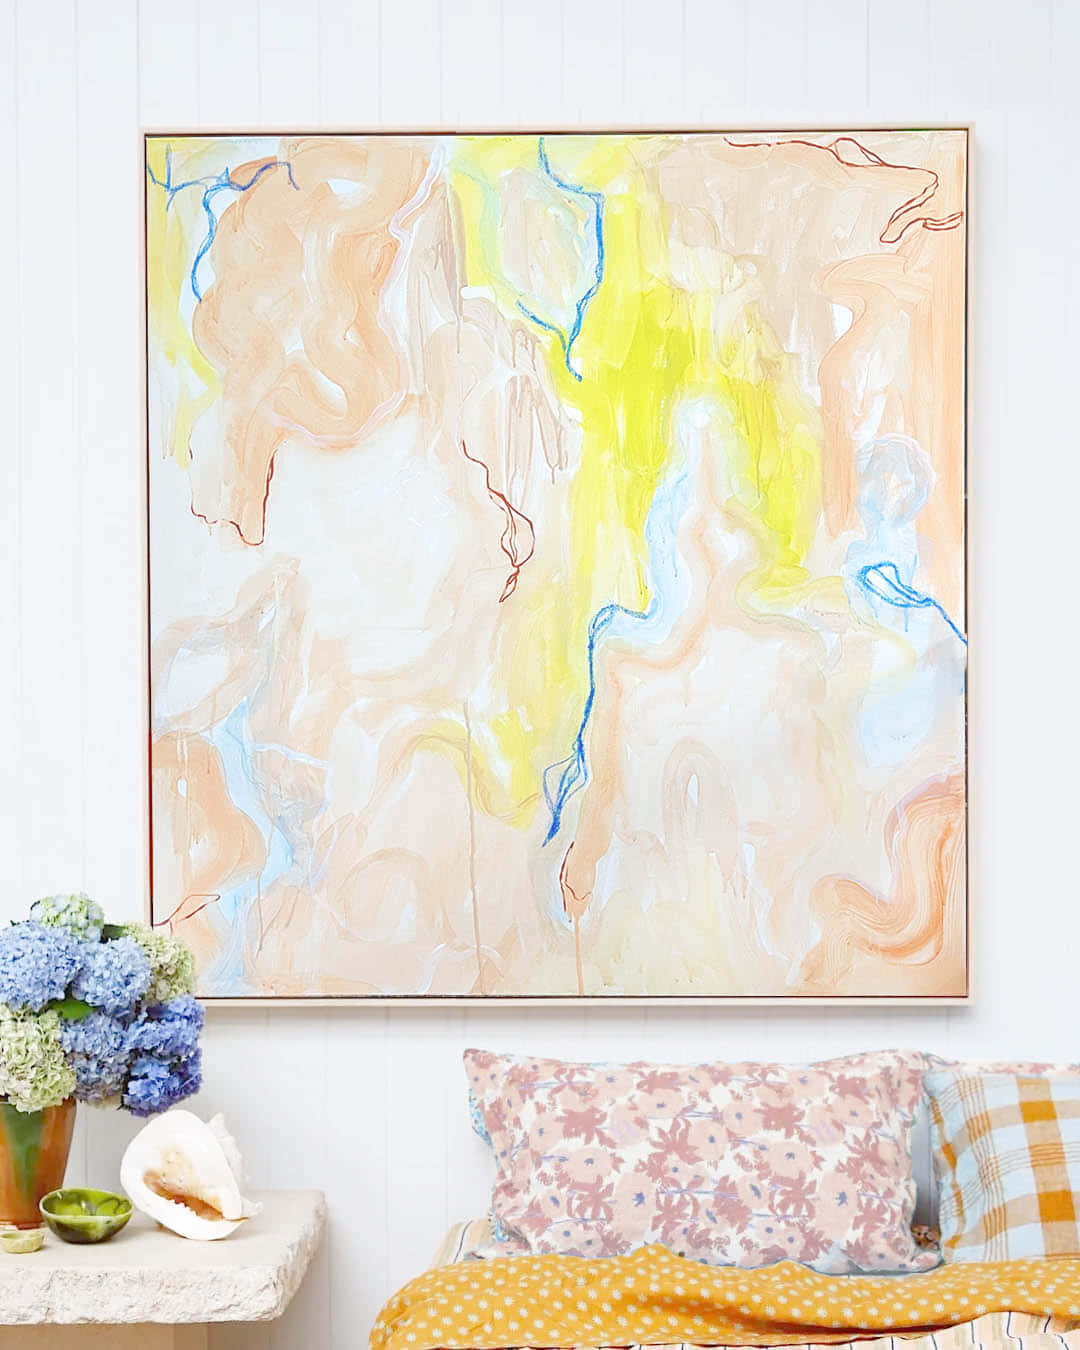 Zesty Yellow On A Painting Wallpaper